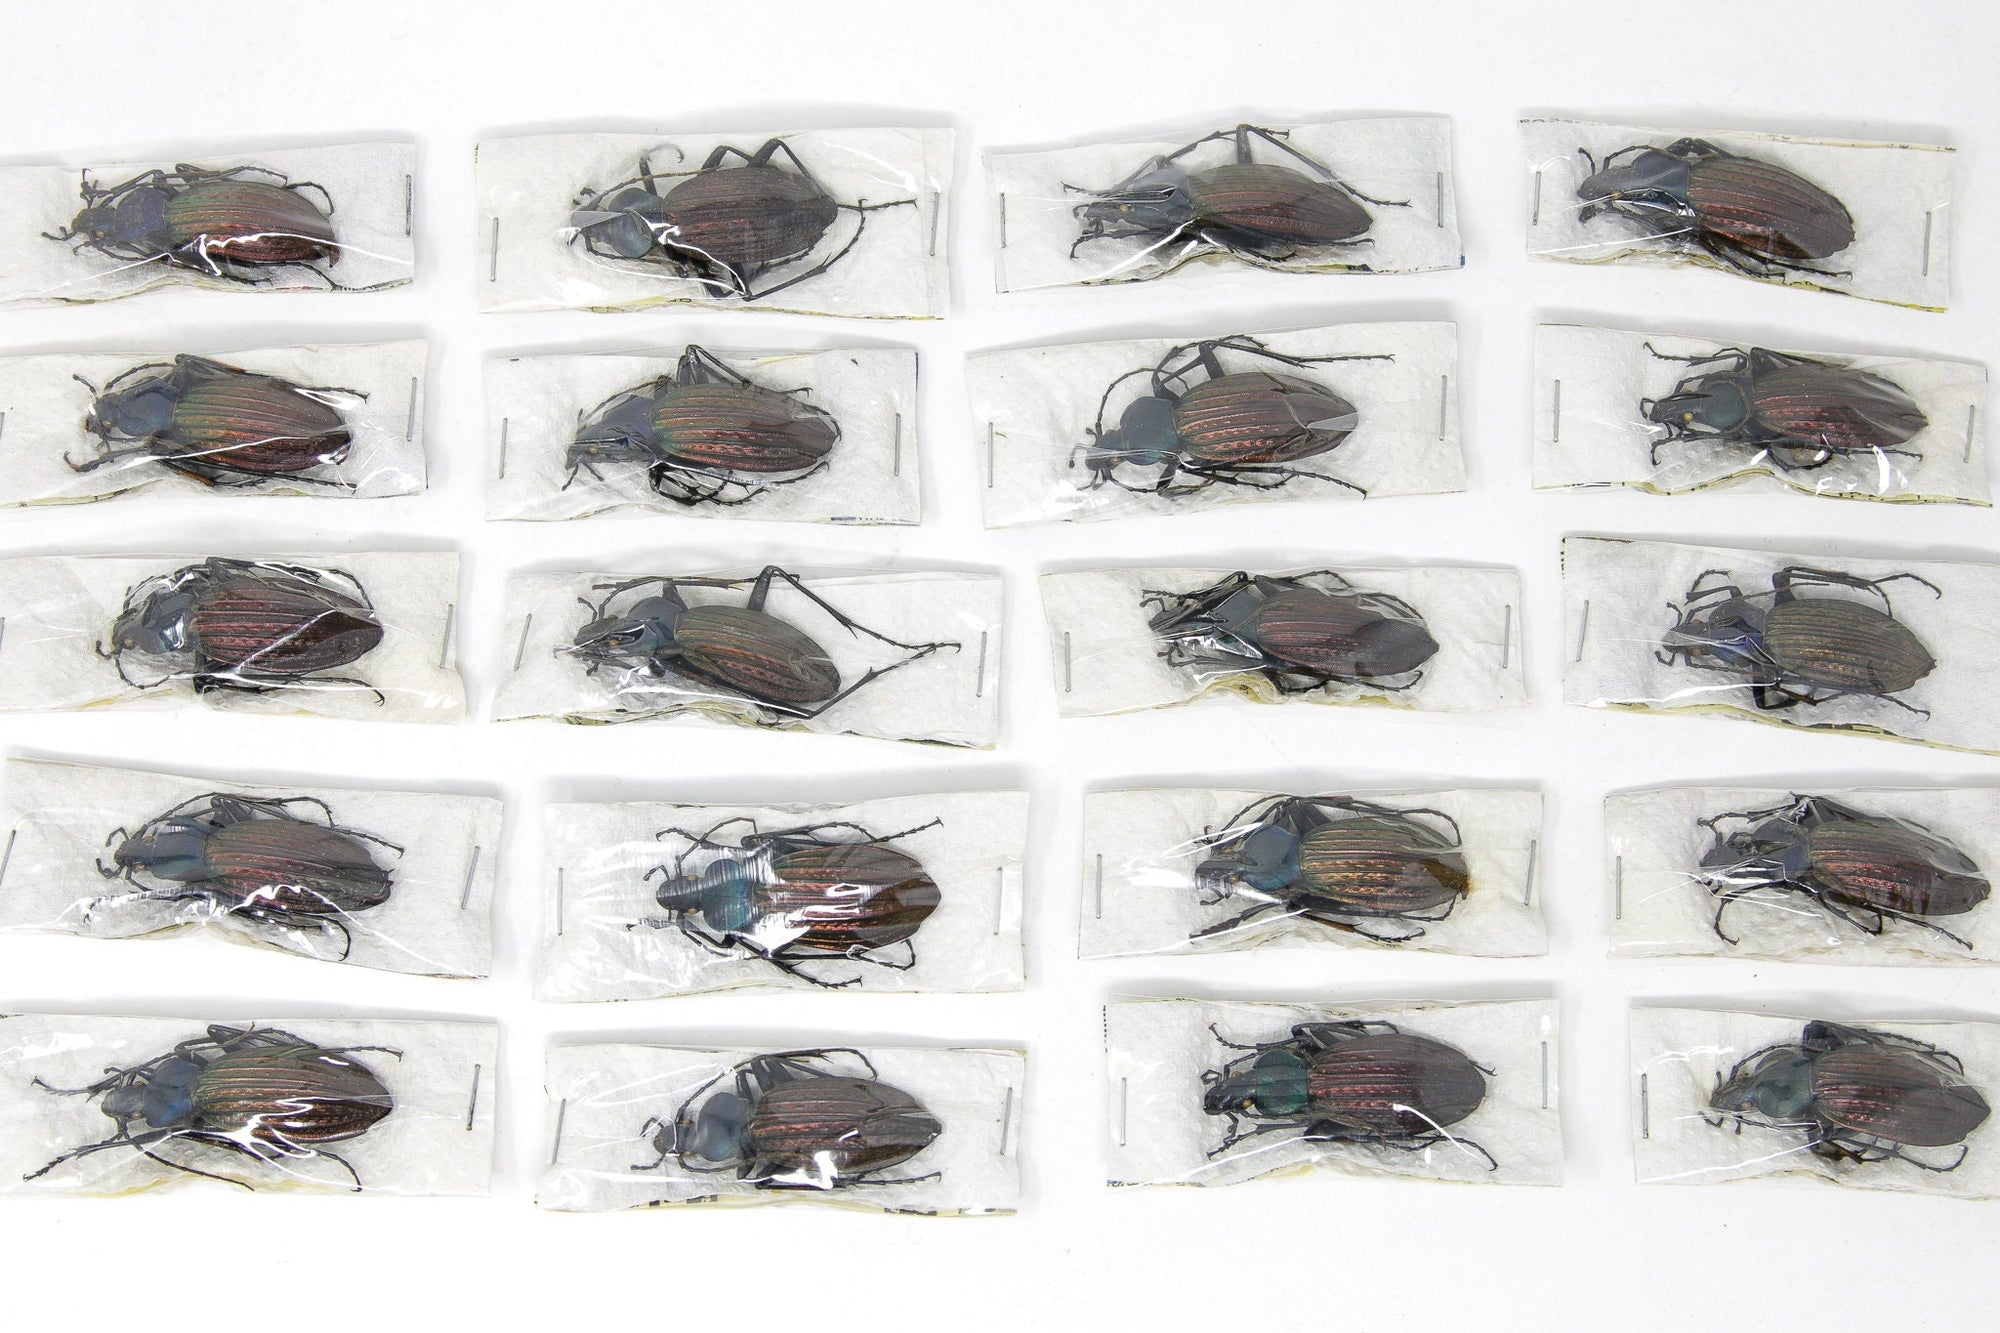 Two (2) Apotompterus cantonensis, Unmounted Beetle Specimens with Scientific Collection Data, A1 Quality